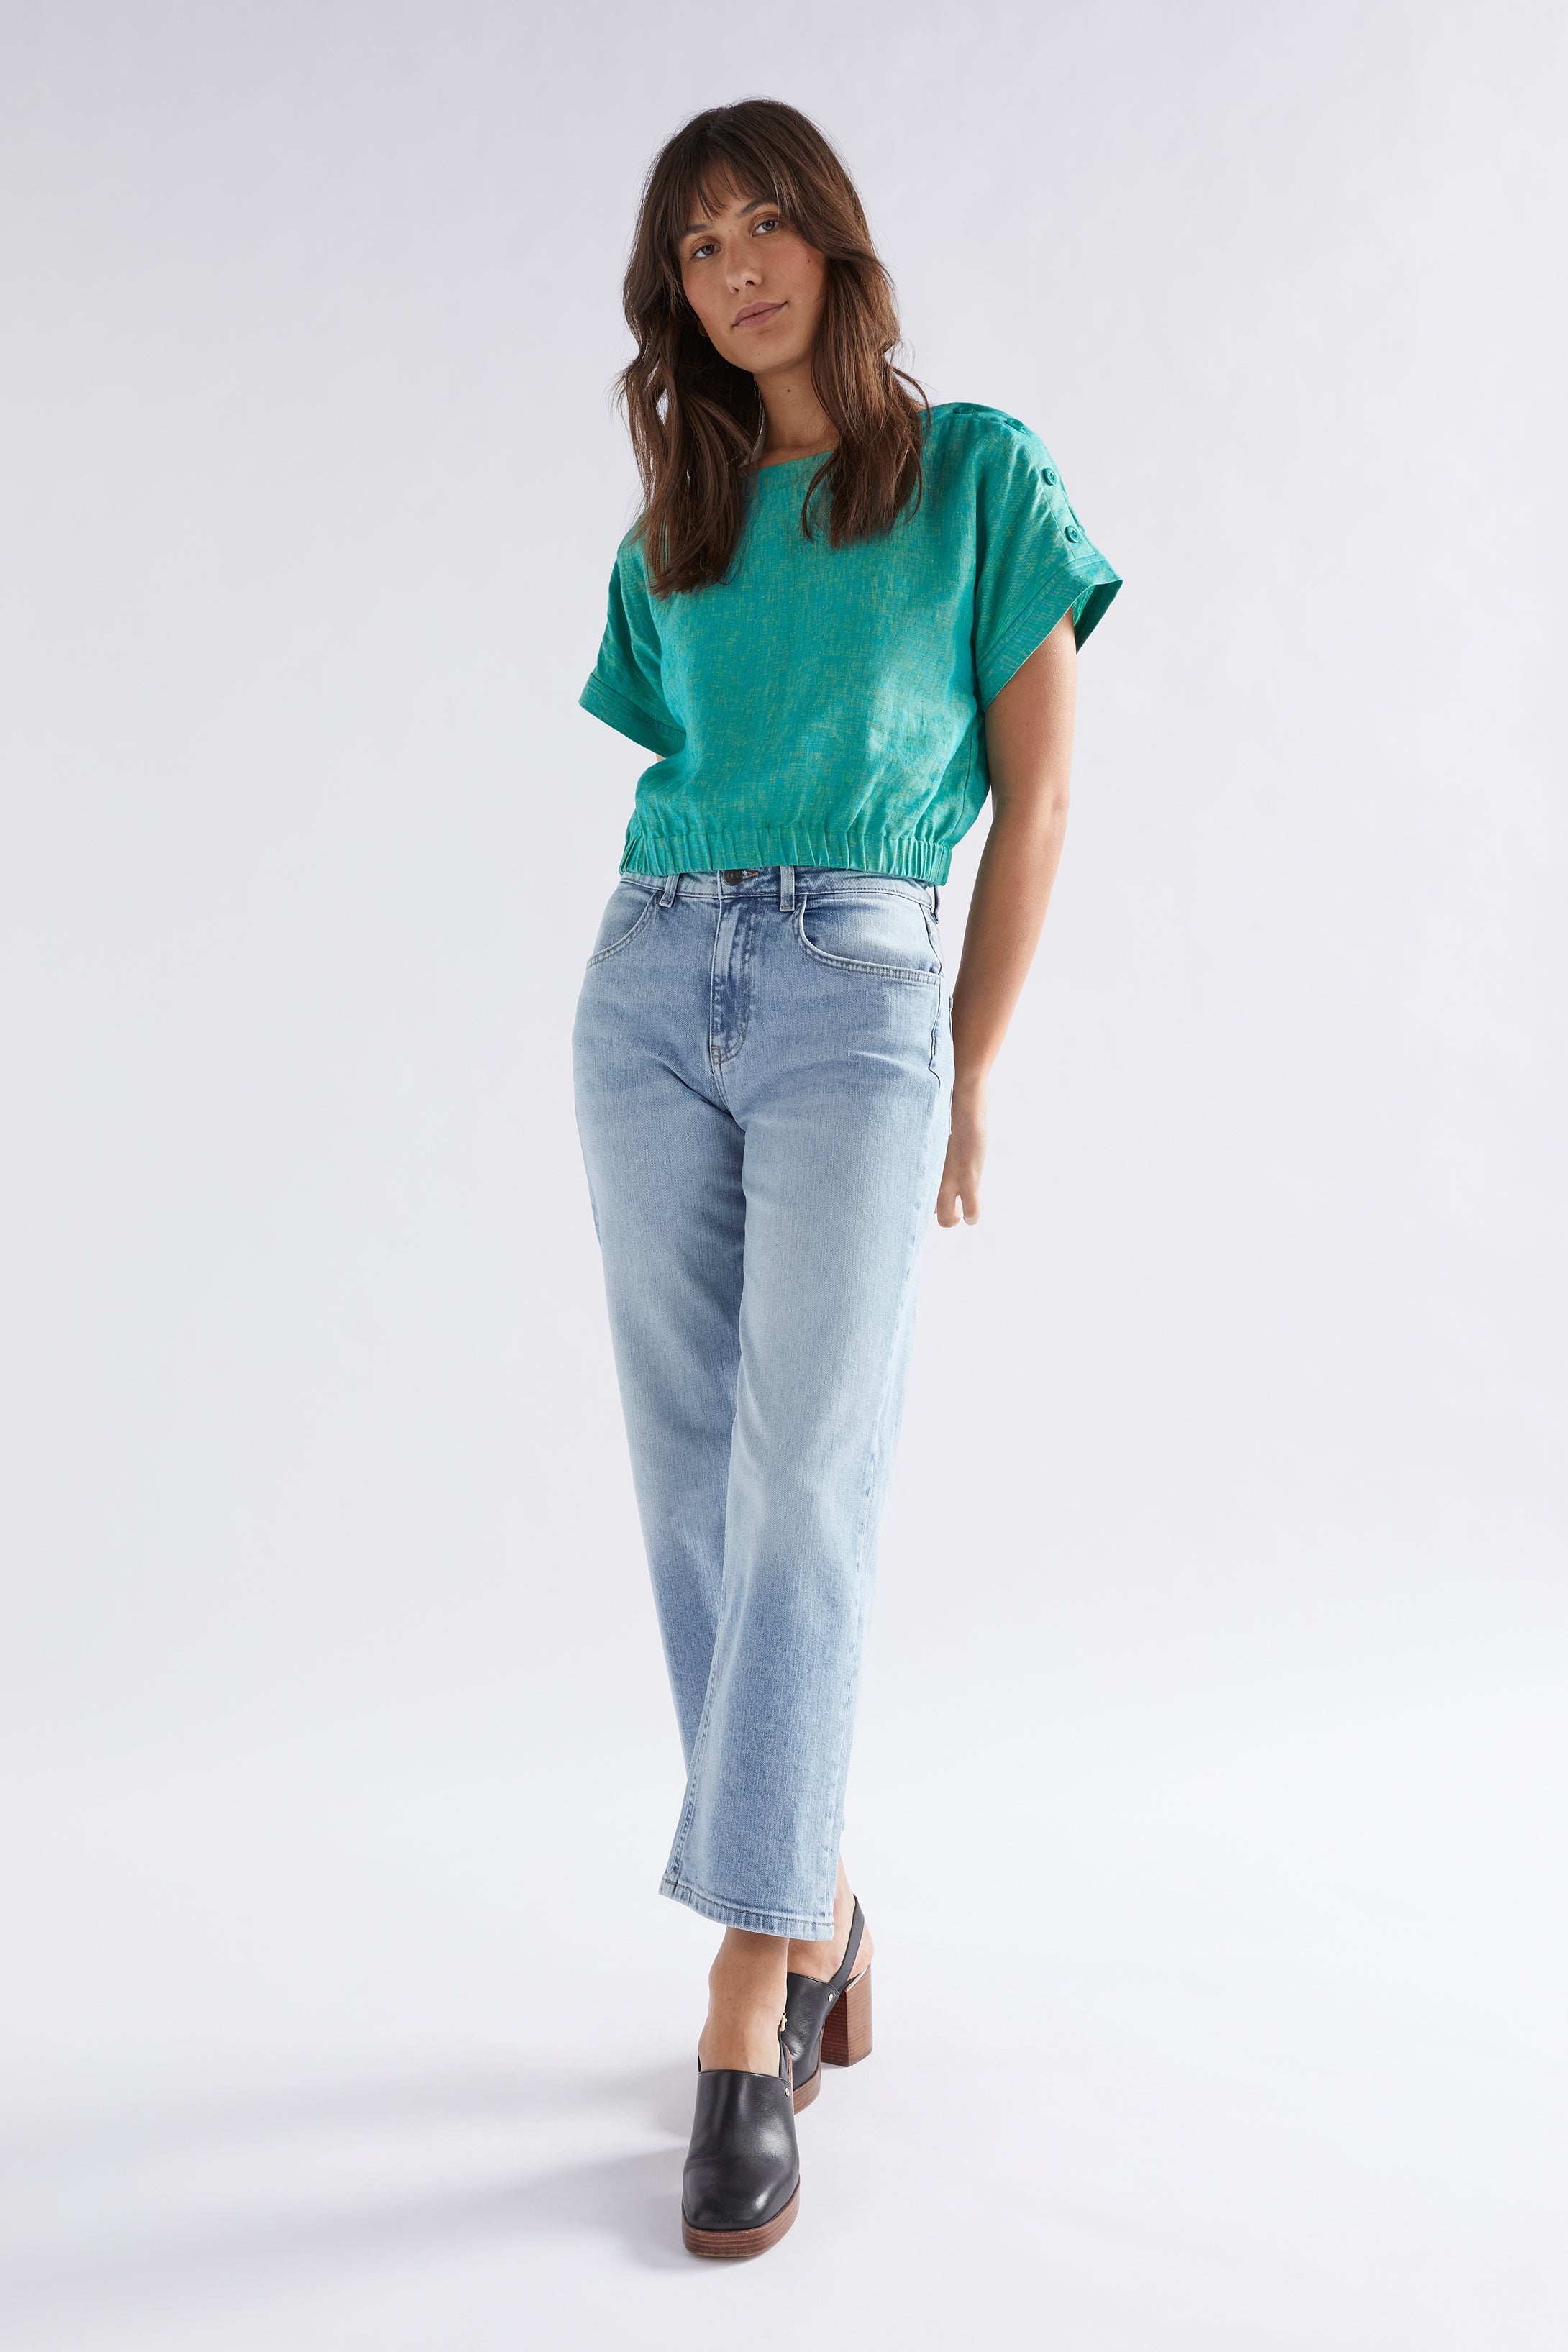 Sav Two Tone Linen Cropped Elastic Hem Top Model Front Full Body | TEAL TWO TONE